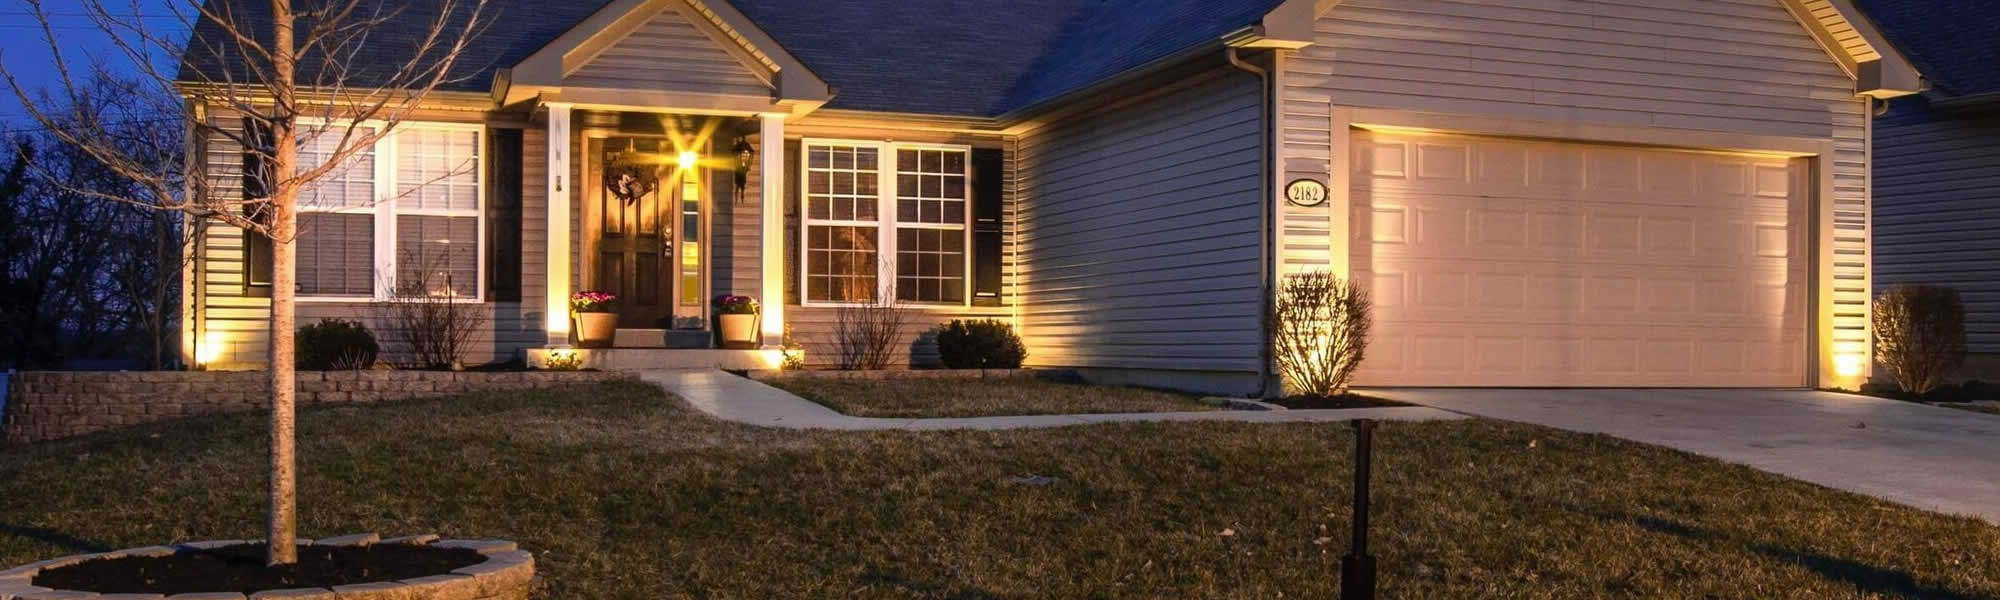 Electricians for Interior and Exterior Lighting